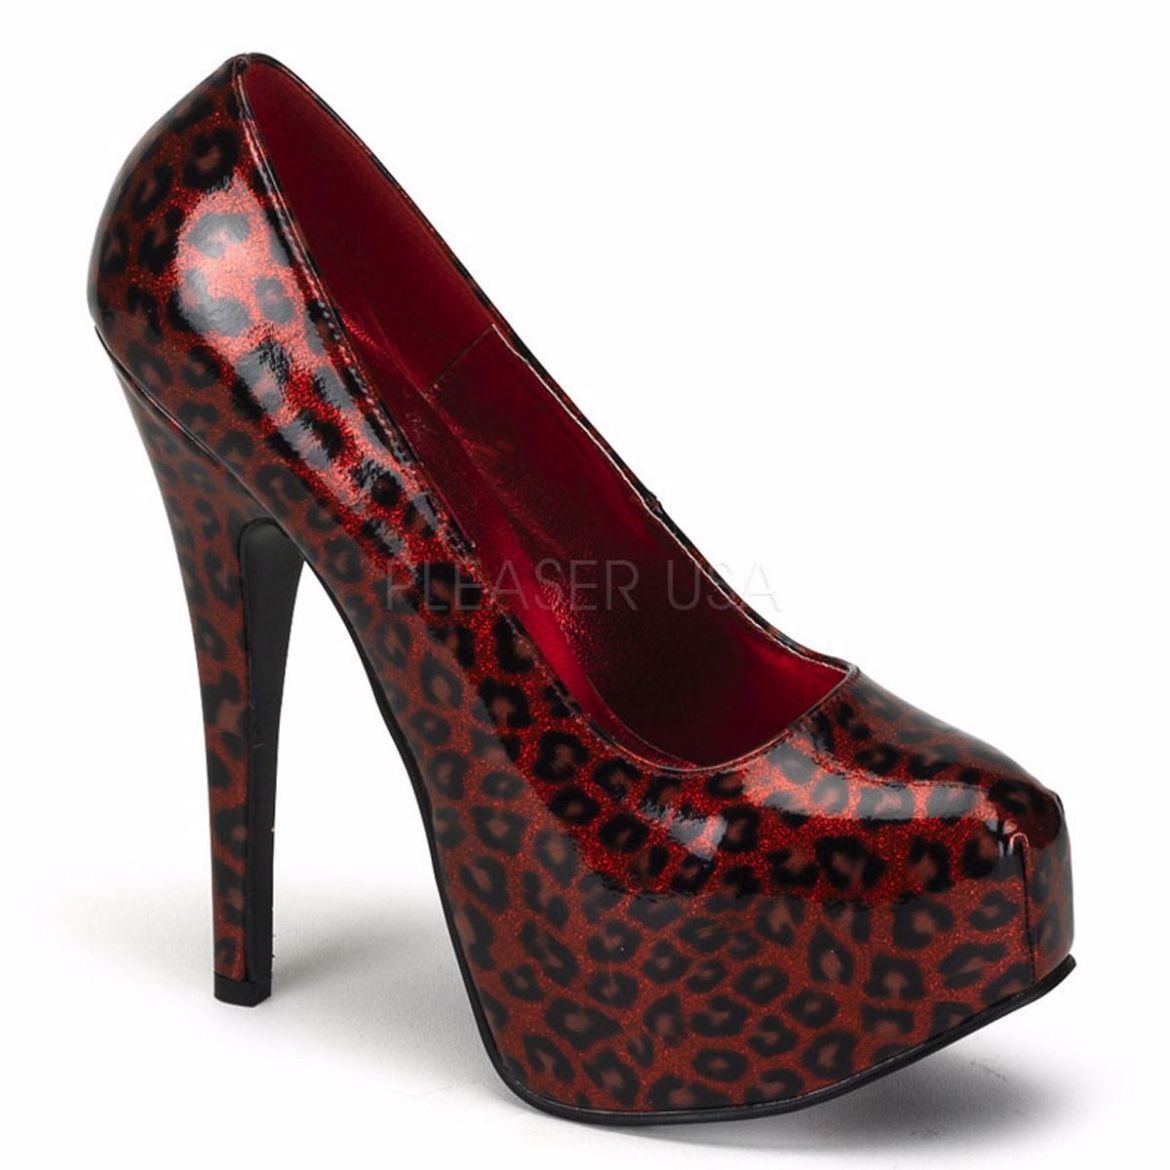 Product image of Bordello Teeze-37 Red Cheetah Patent, 5 3/4 inch (14.6 cm) Heel, 1 3/4 inch (4.4 cm) Platform Court Pump Shoes